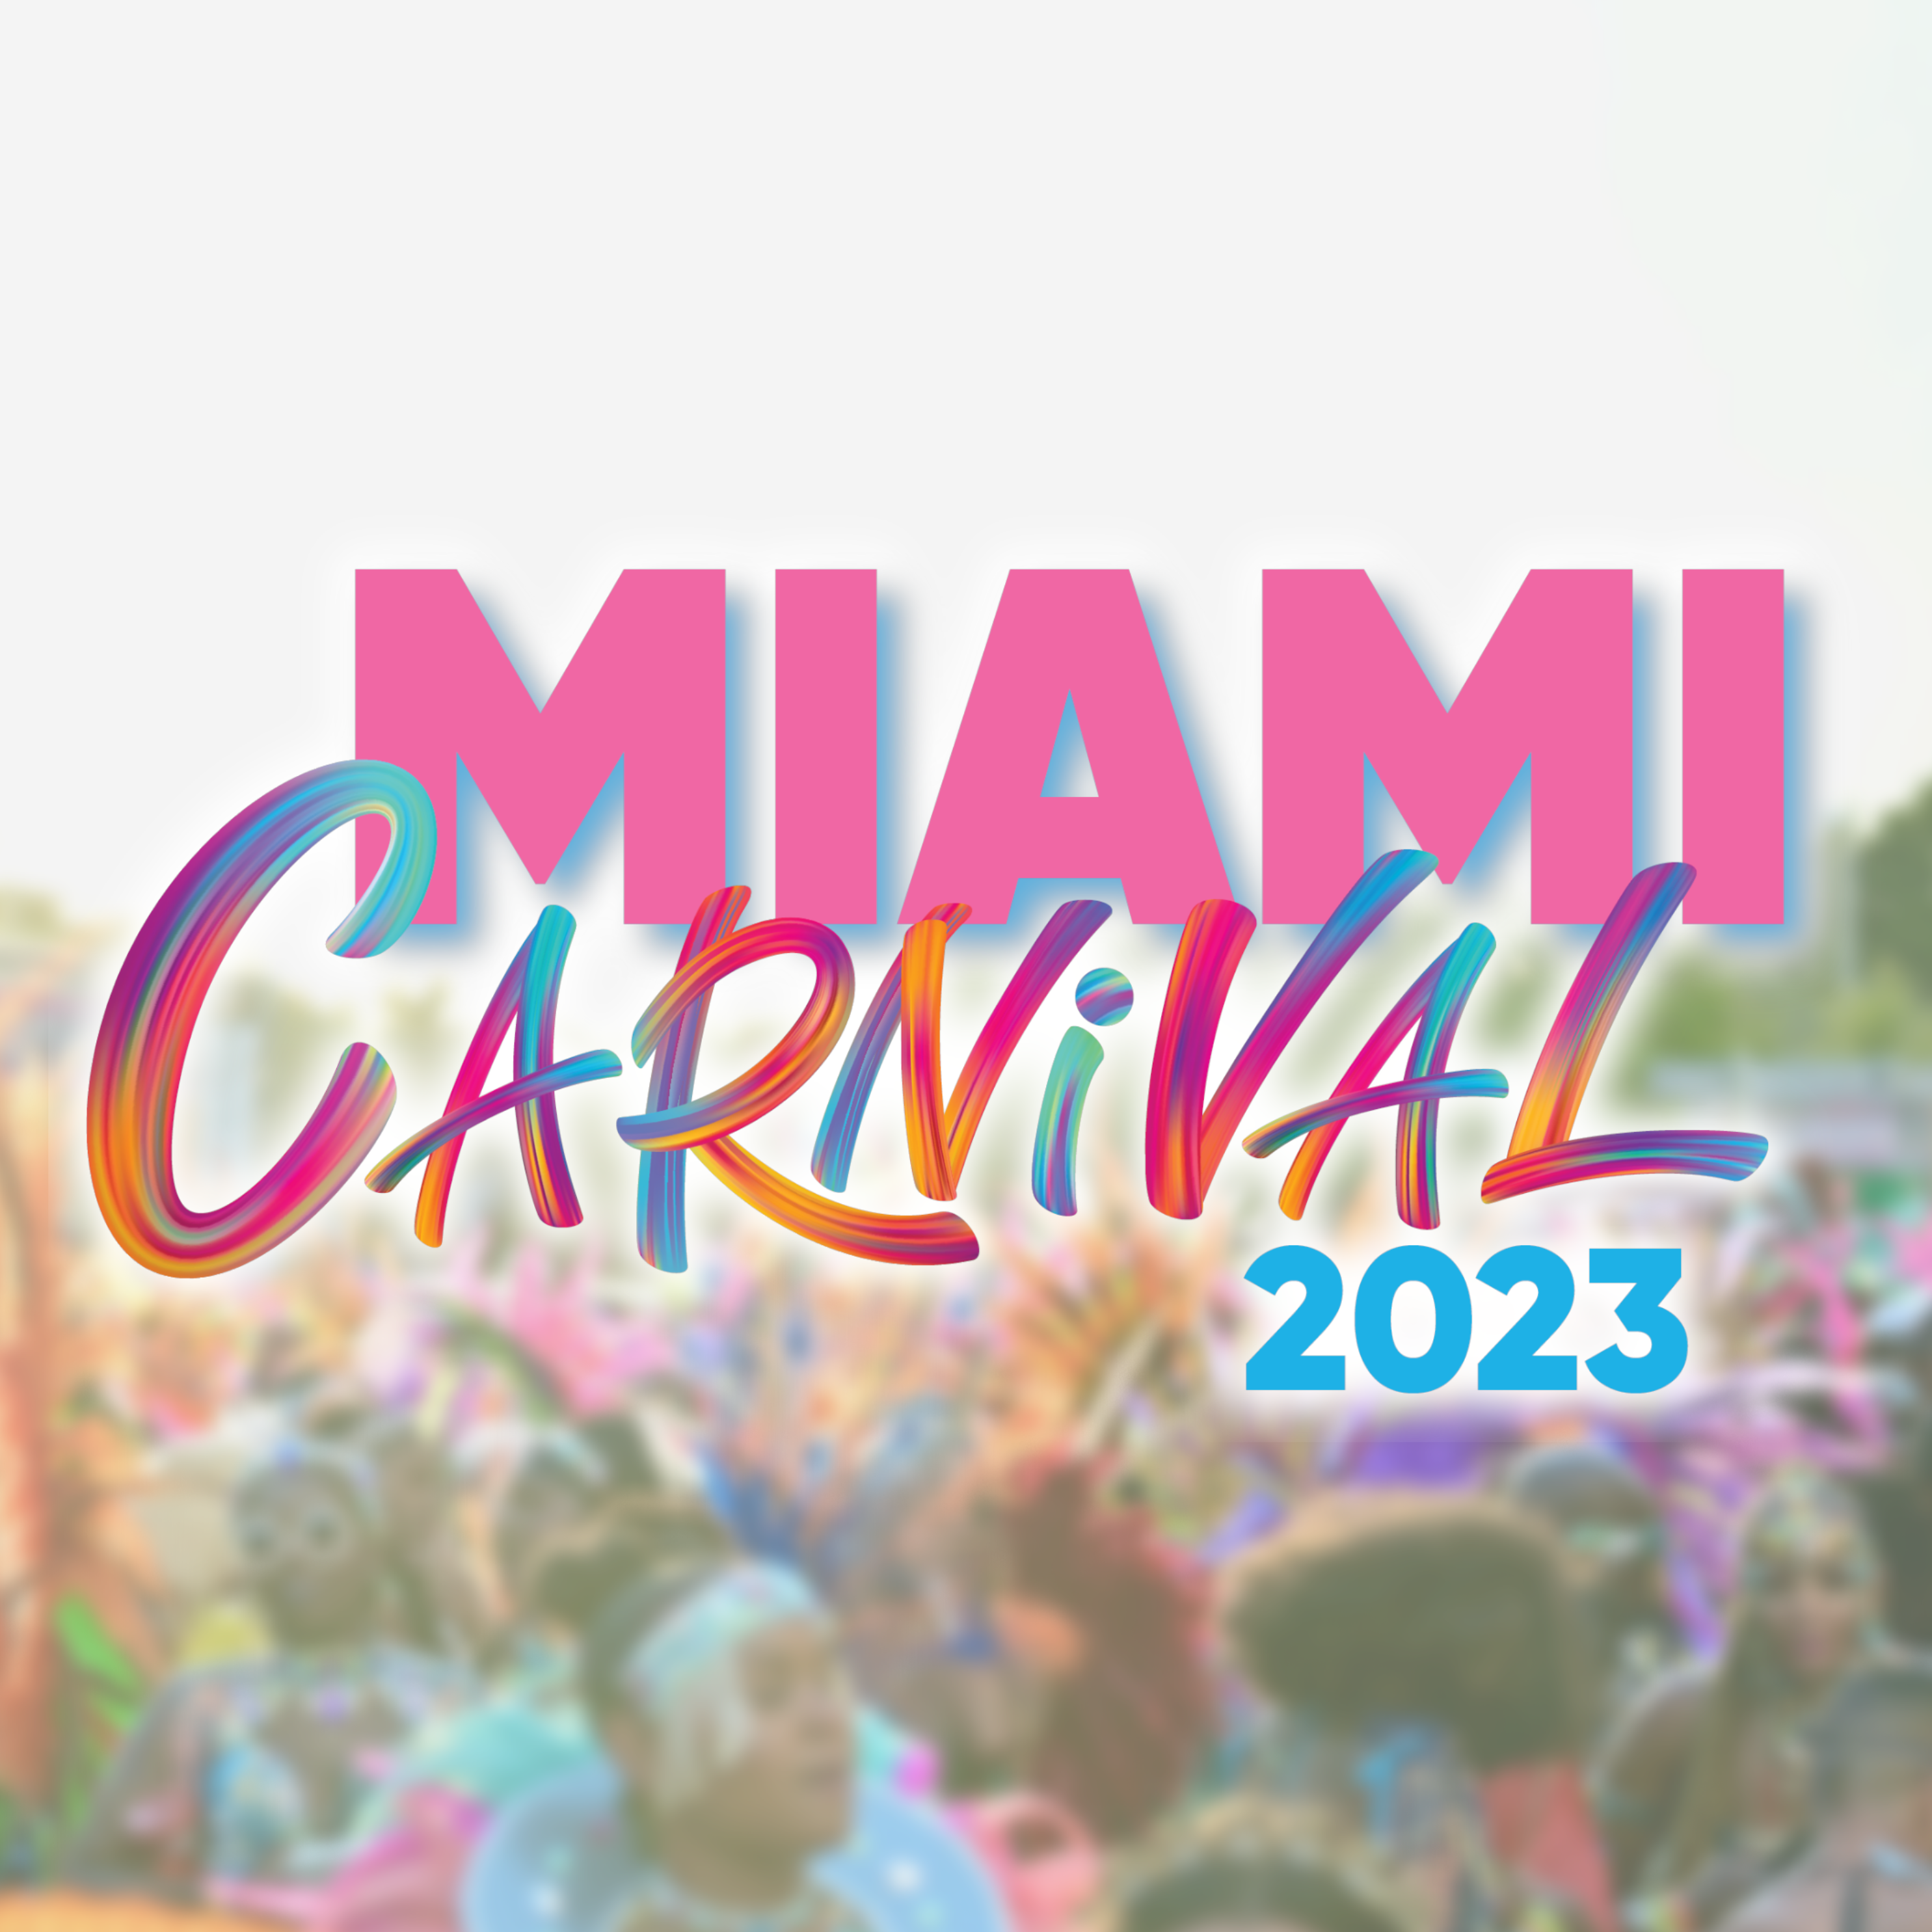 Blog - Welcome to Miami Carnival